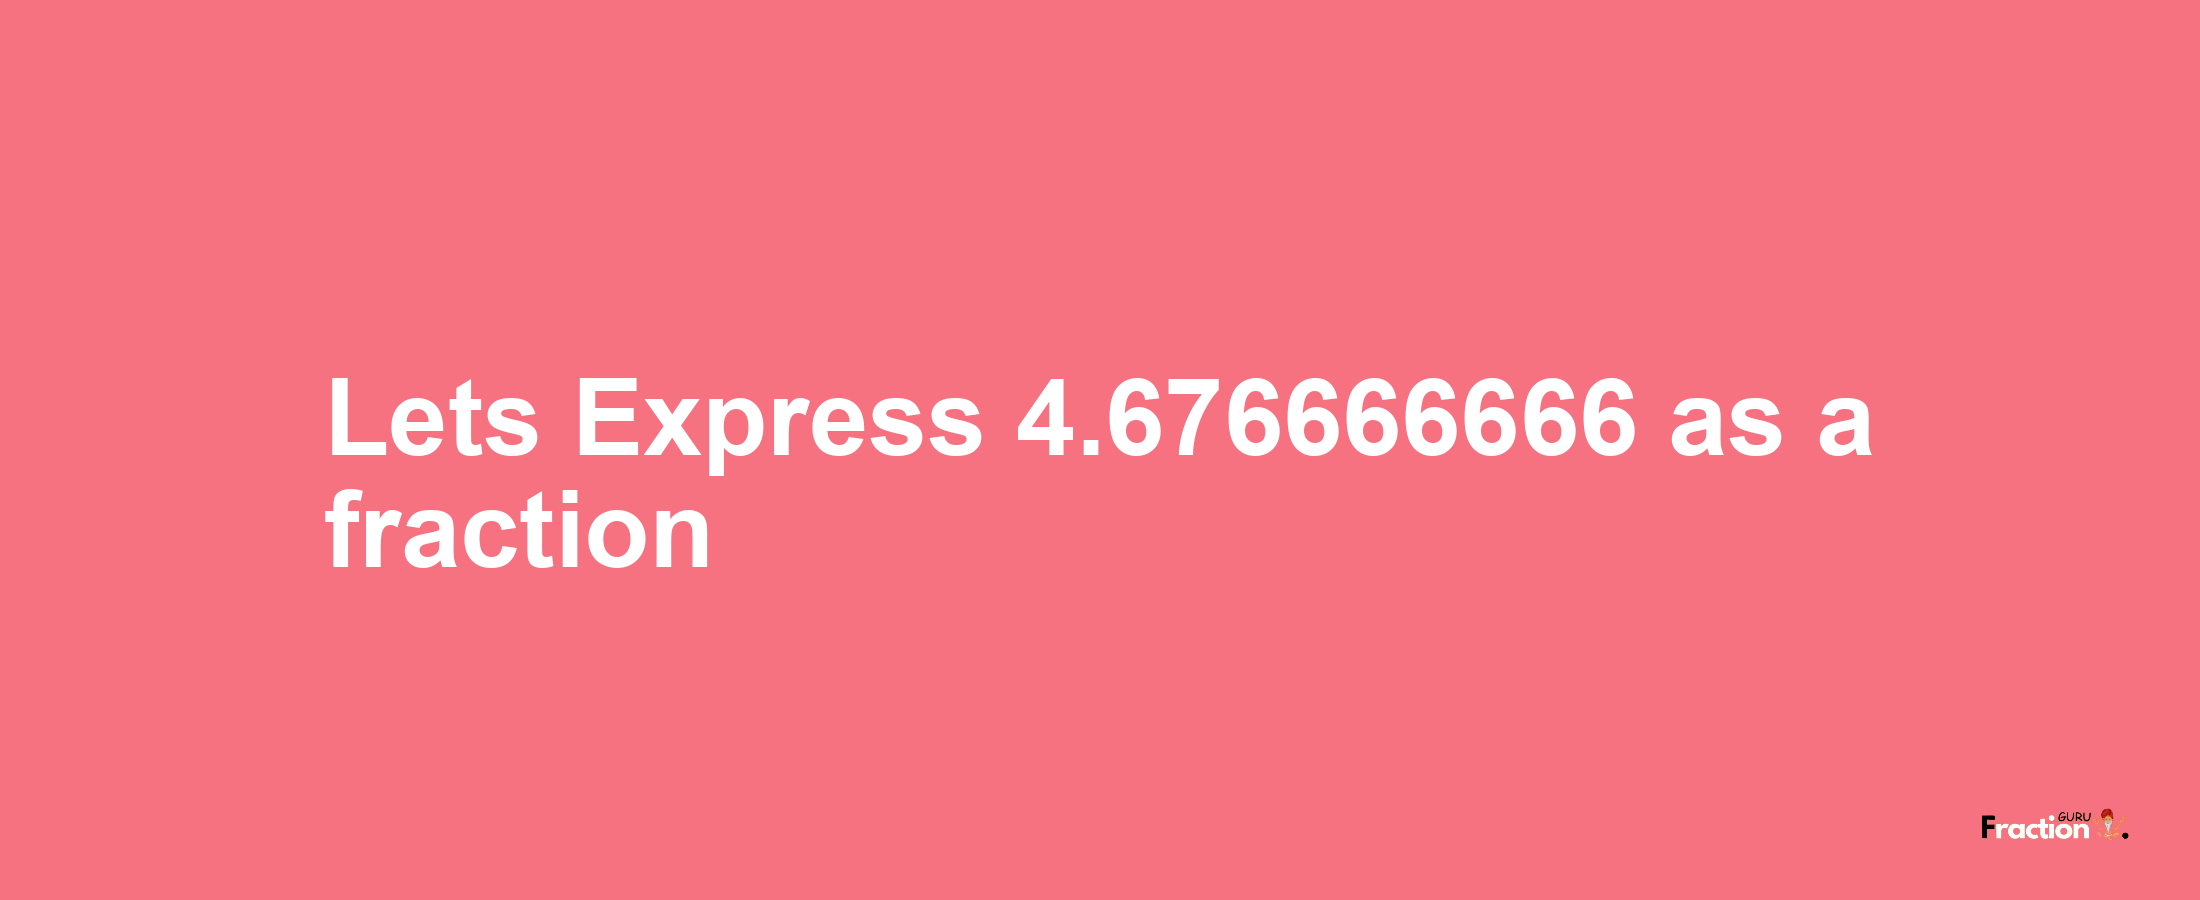 Lets Express 4.676666666 as afraction